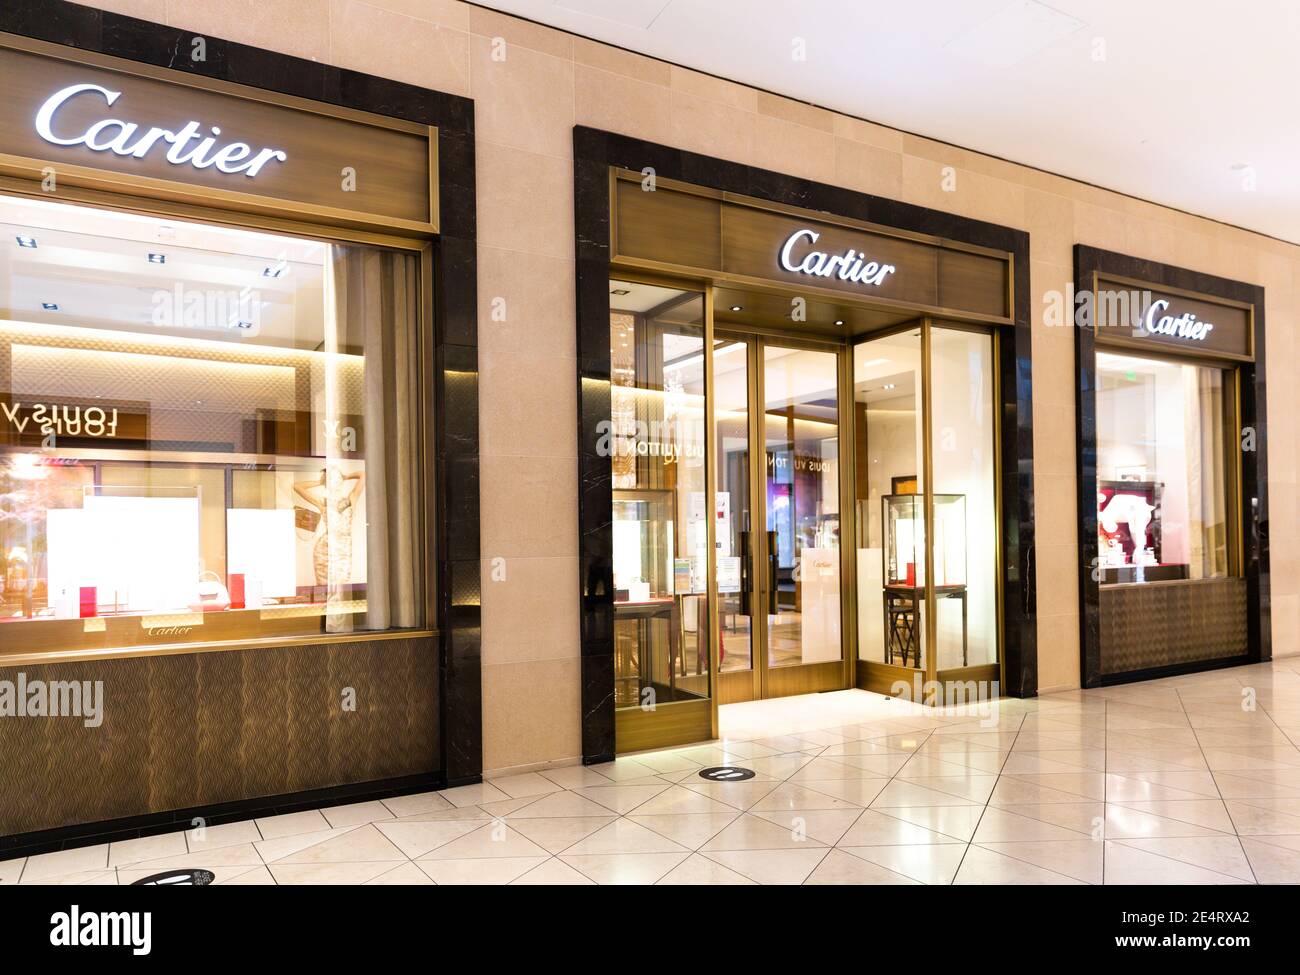 cartier clothing